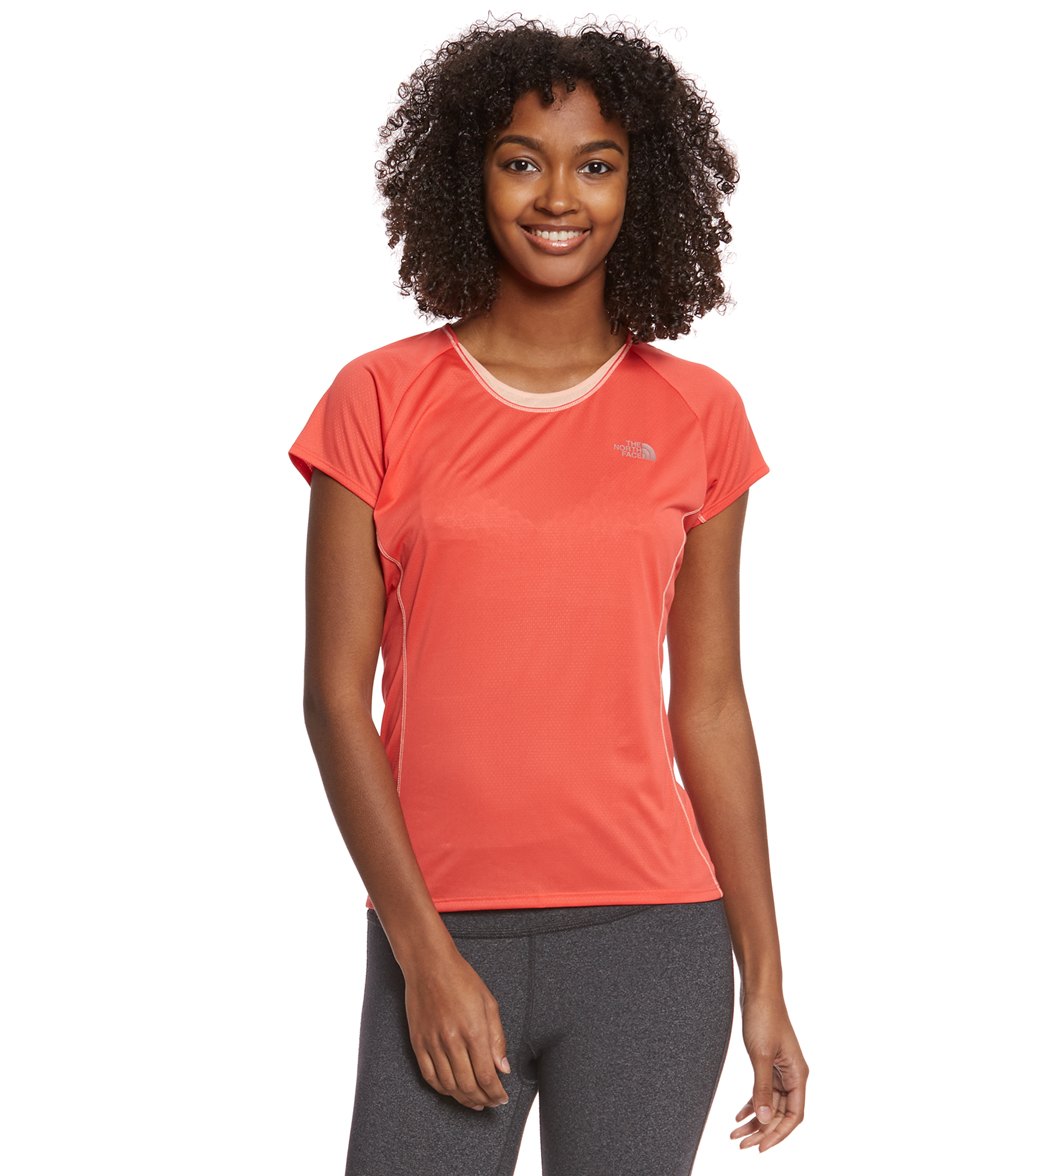 The North Face Women's Btn Short Sleeve Top - Cayenne Red/Tropical Peach Large Polyester - Swimoutlet.com